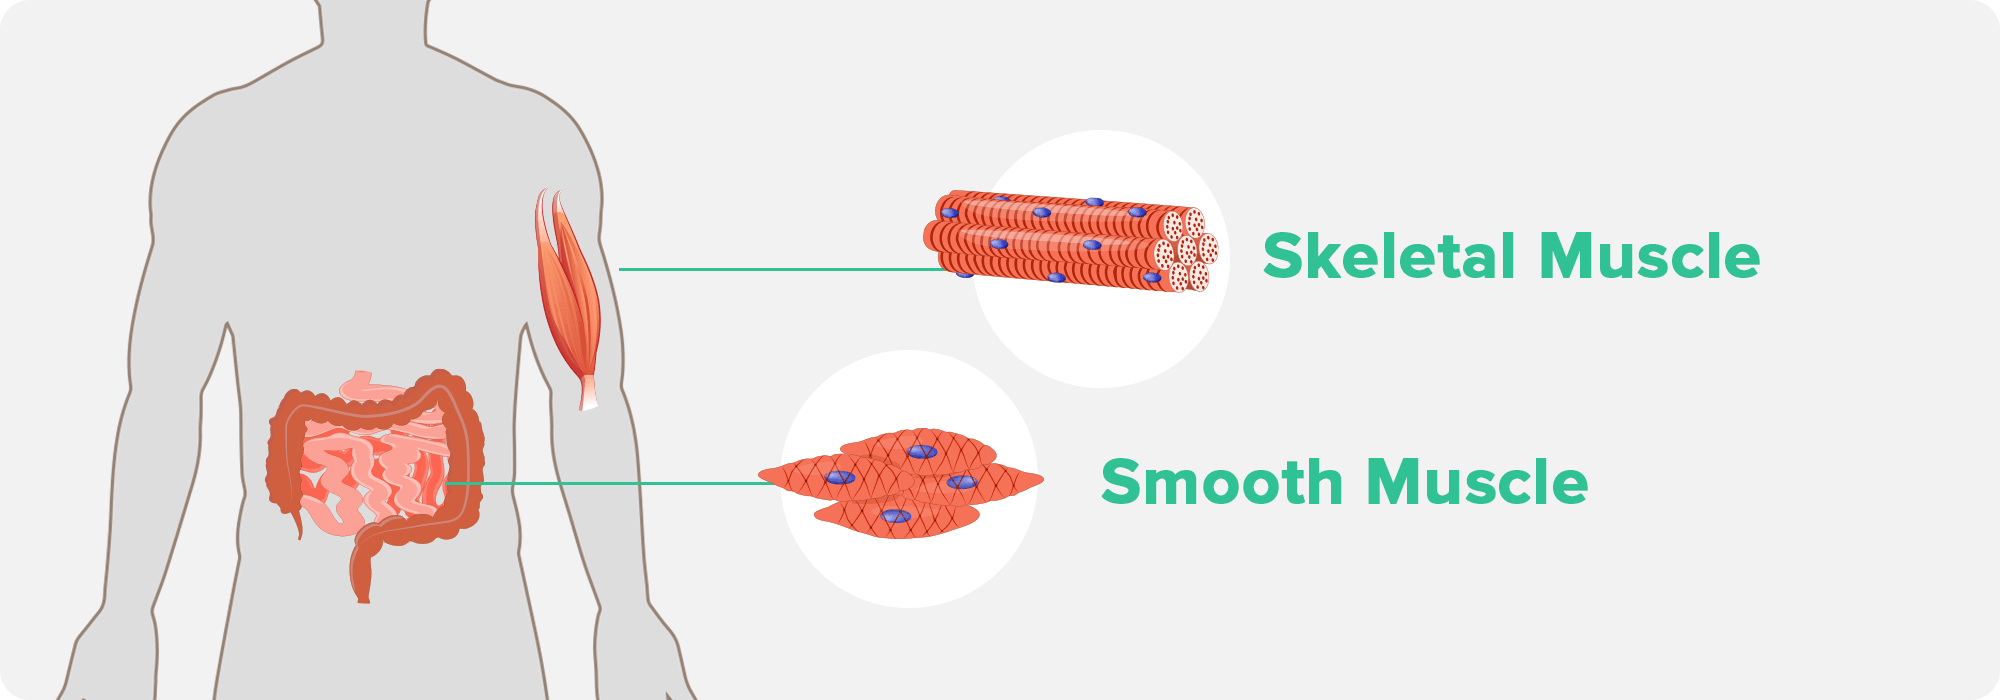 Skeletal Muscle and Smooth Muscle